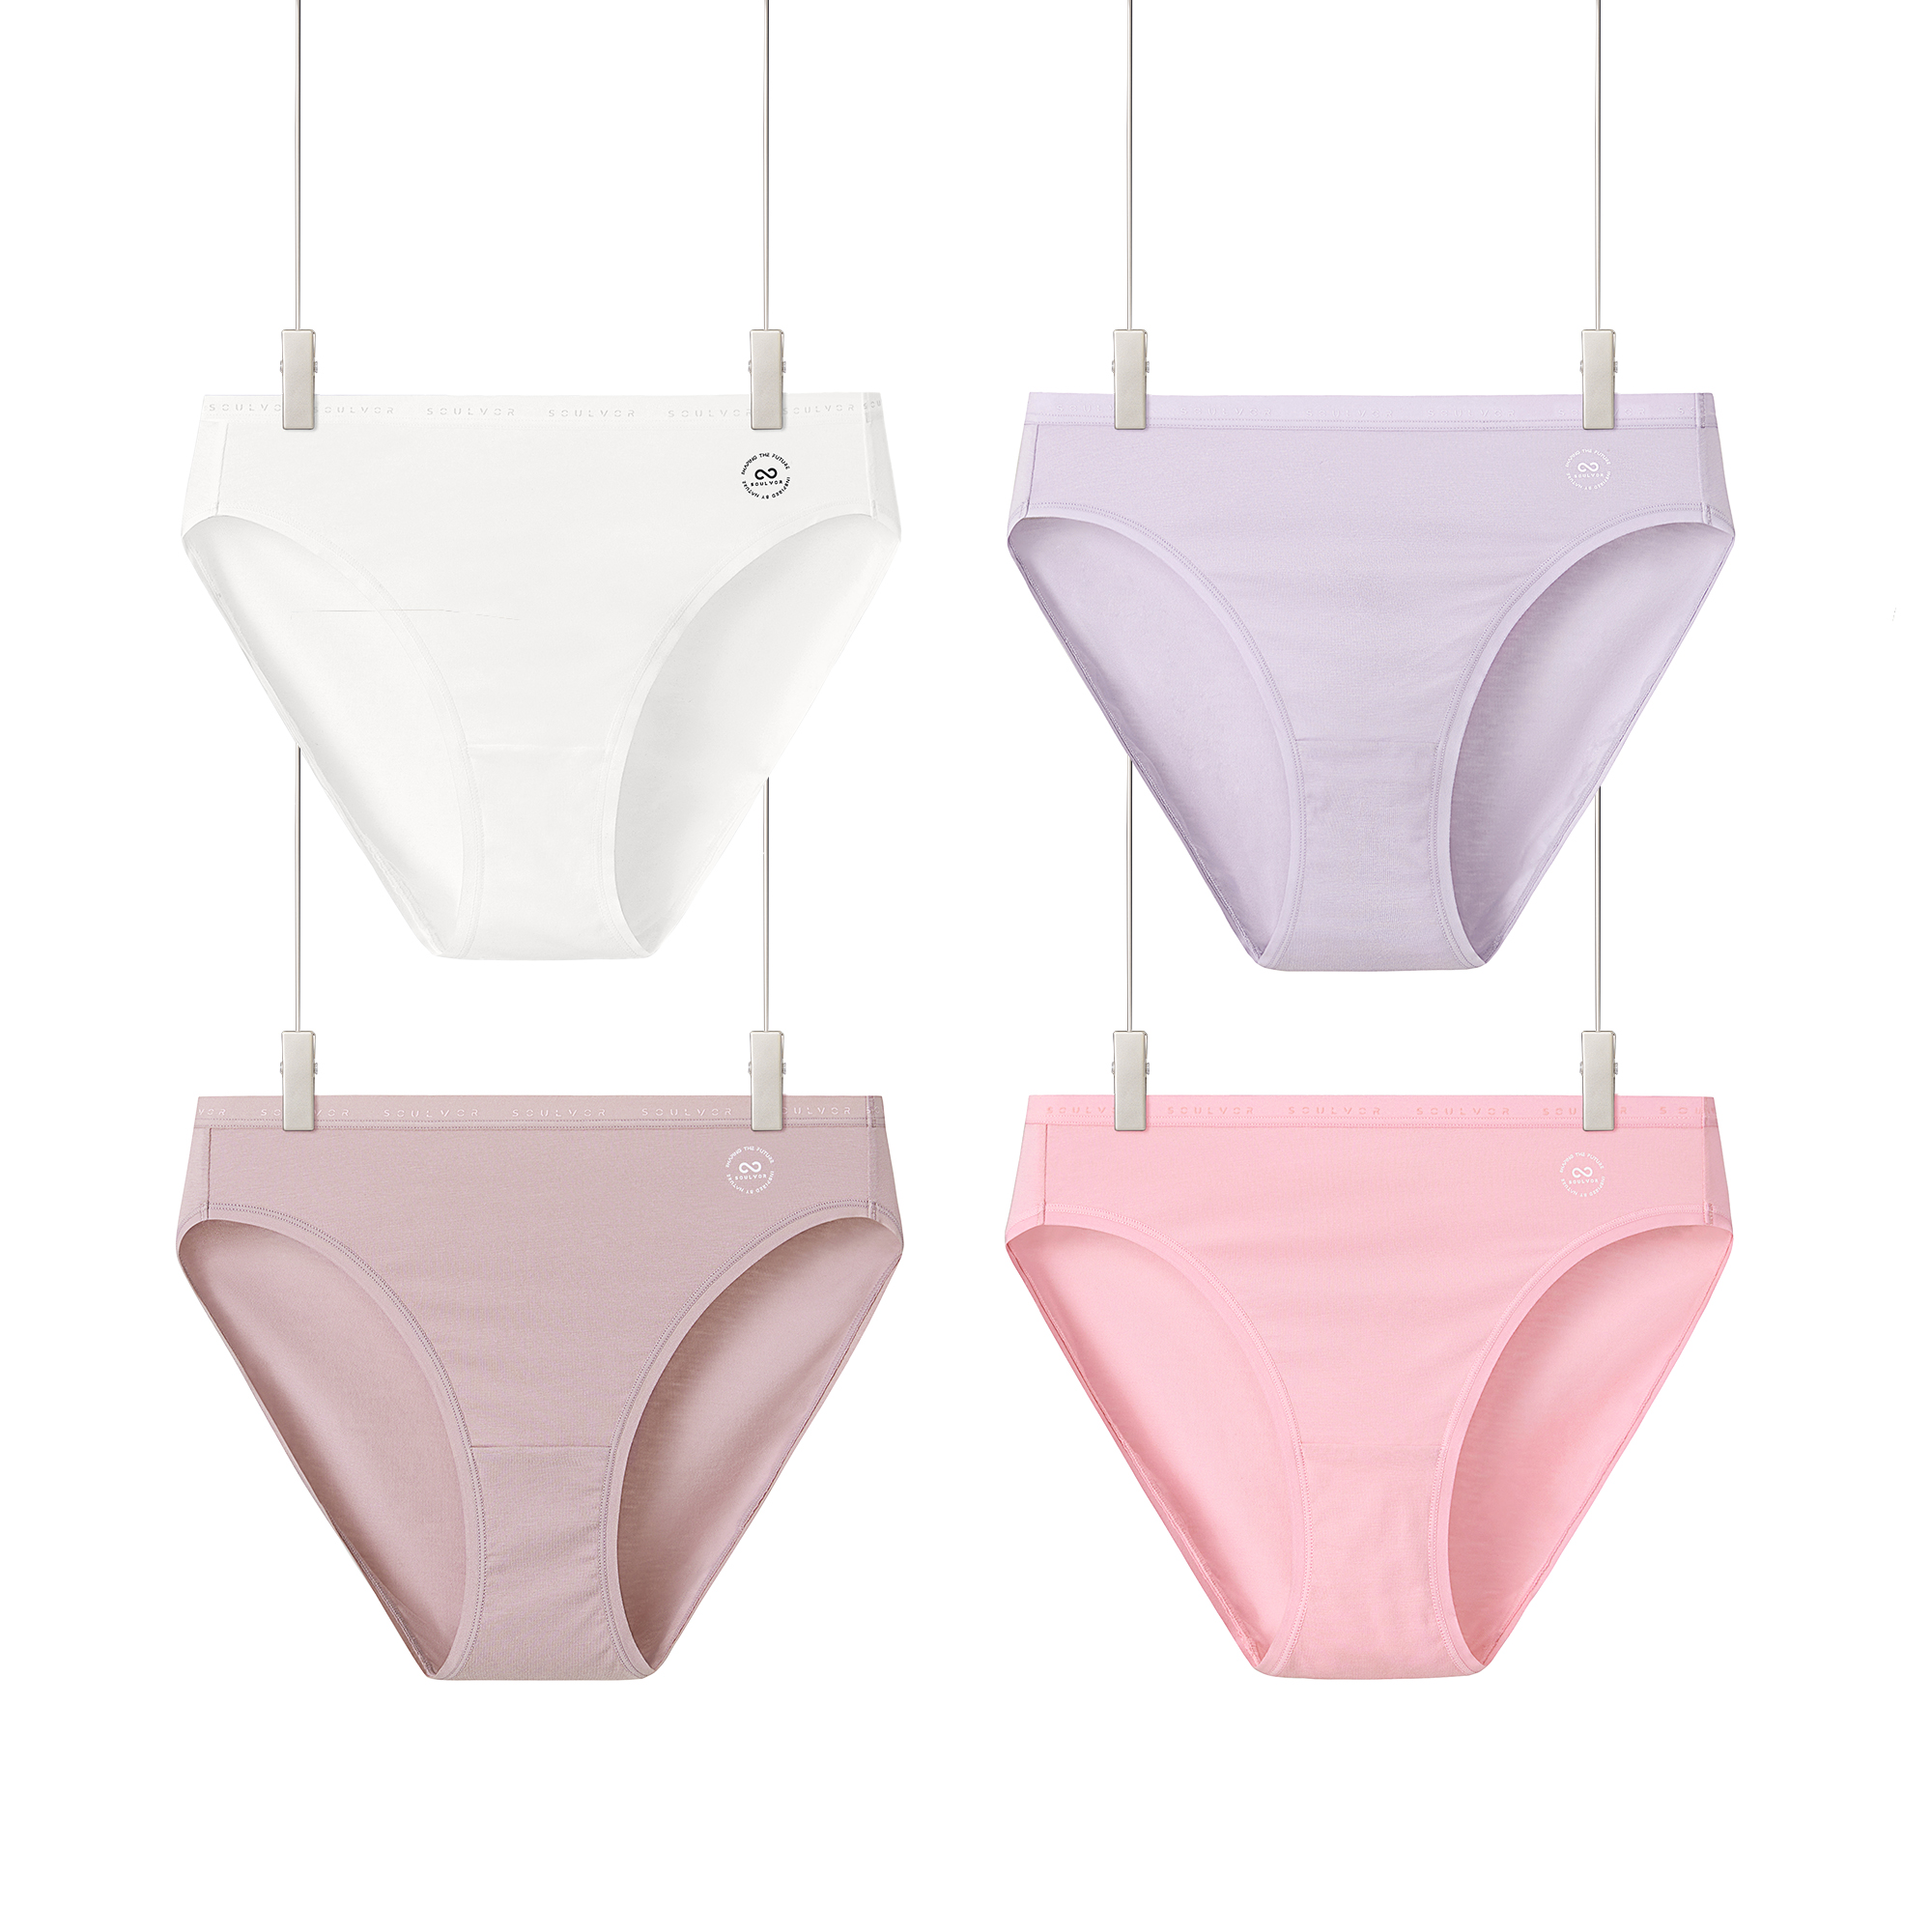 SINOPHANT Ladies Cotton Knickers Hight Waisted Knickers Multipack Buy2Get1  Free